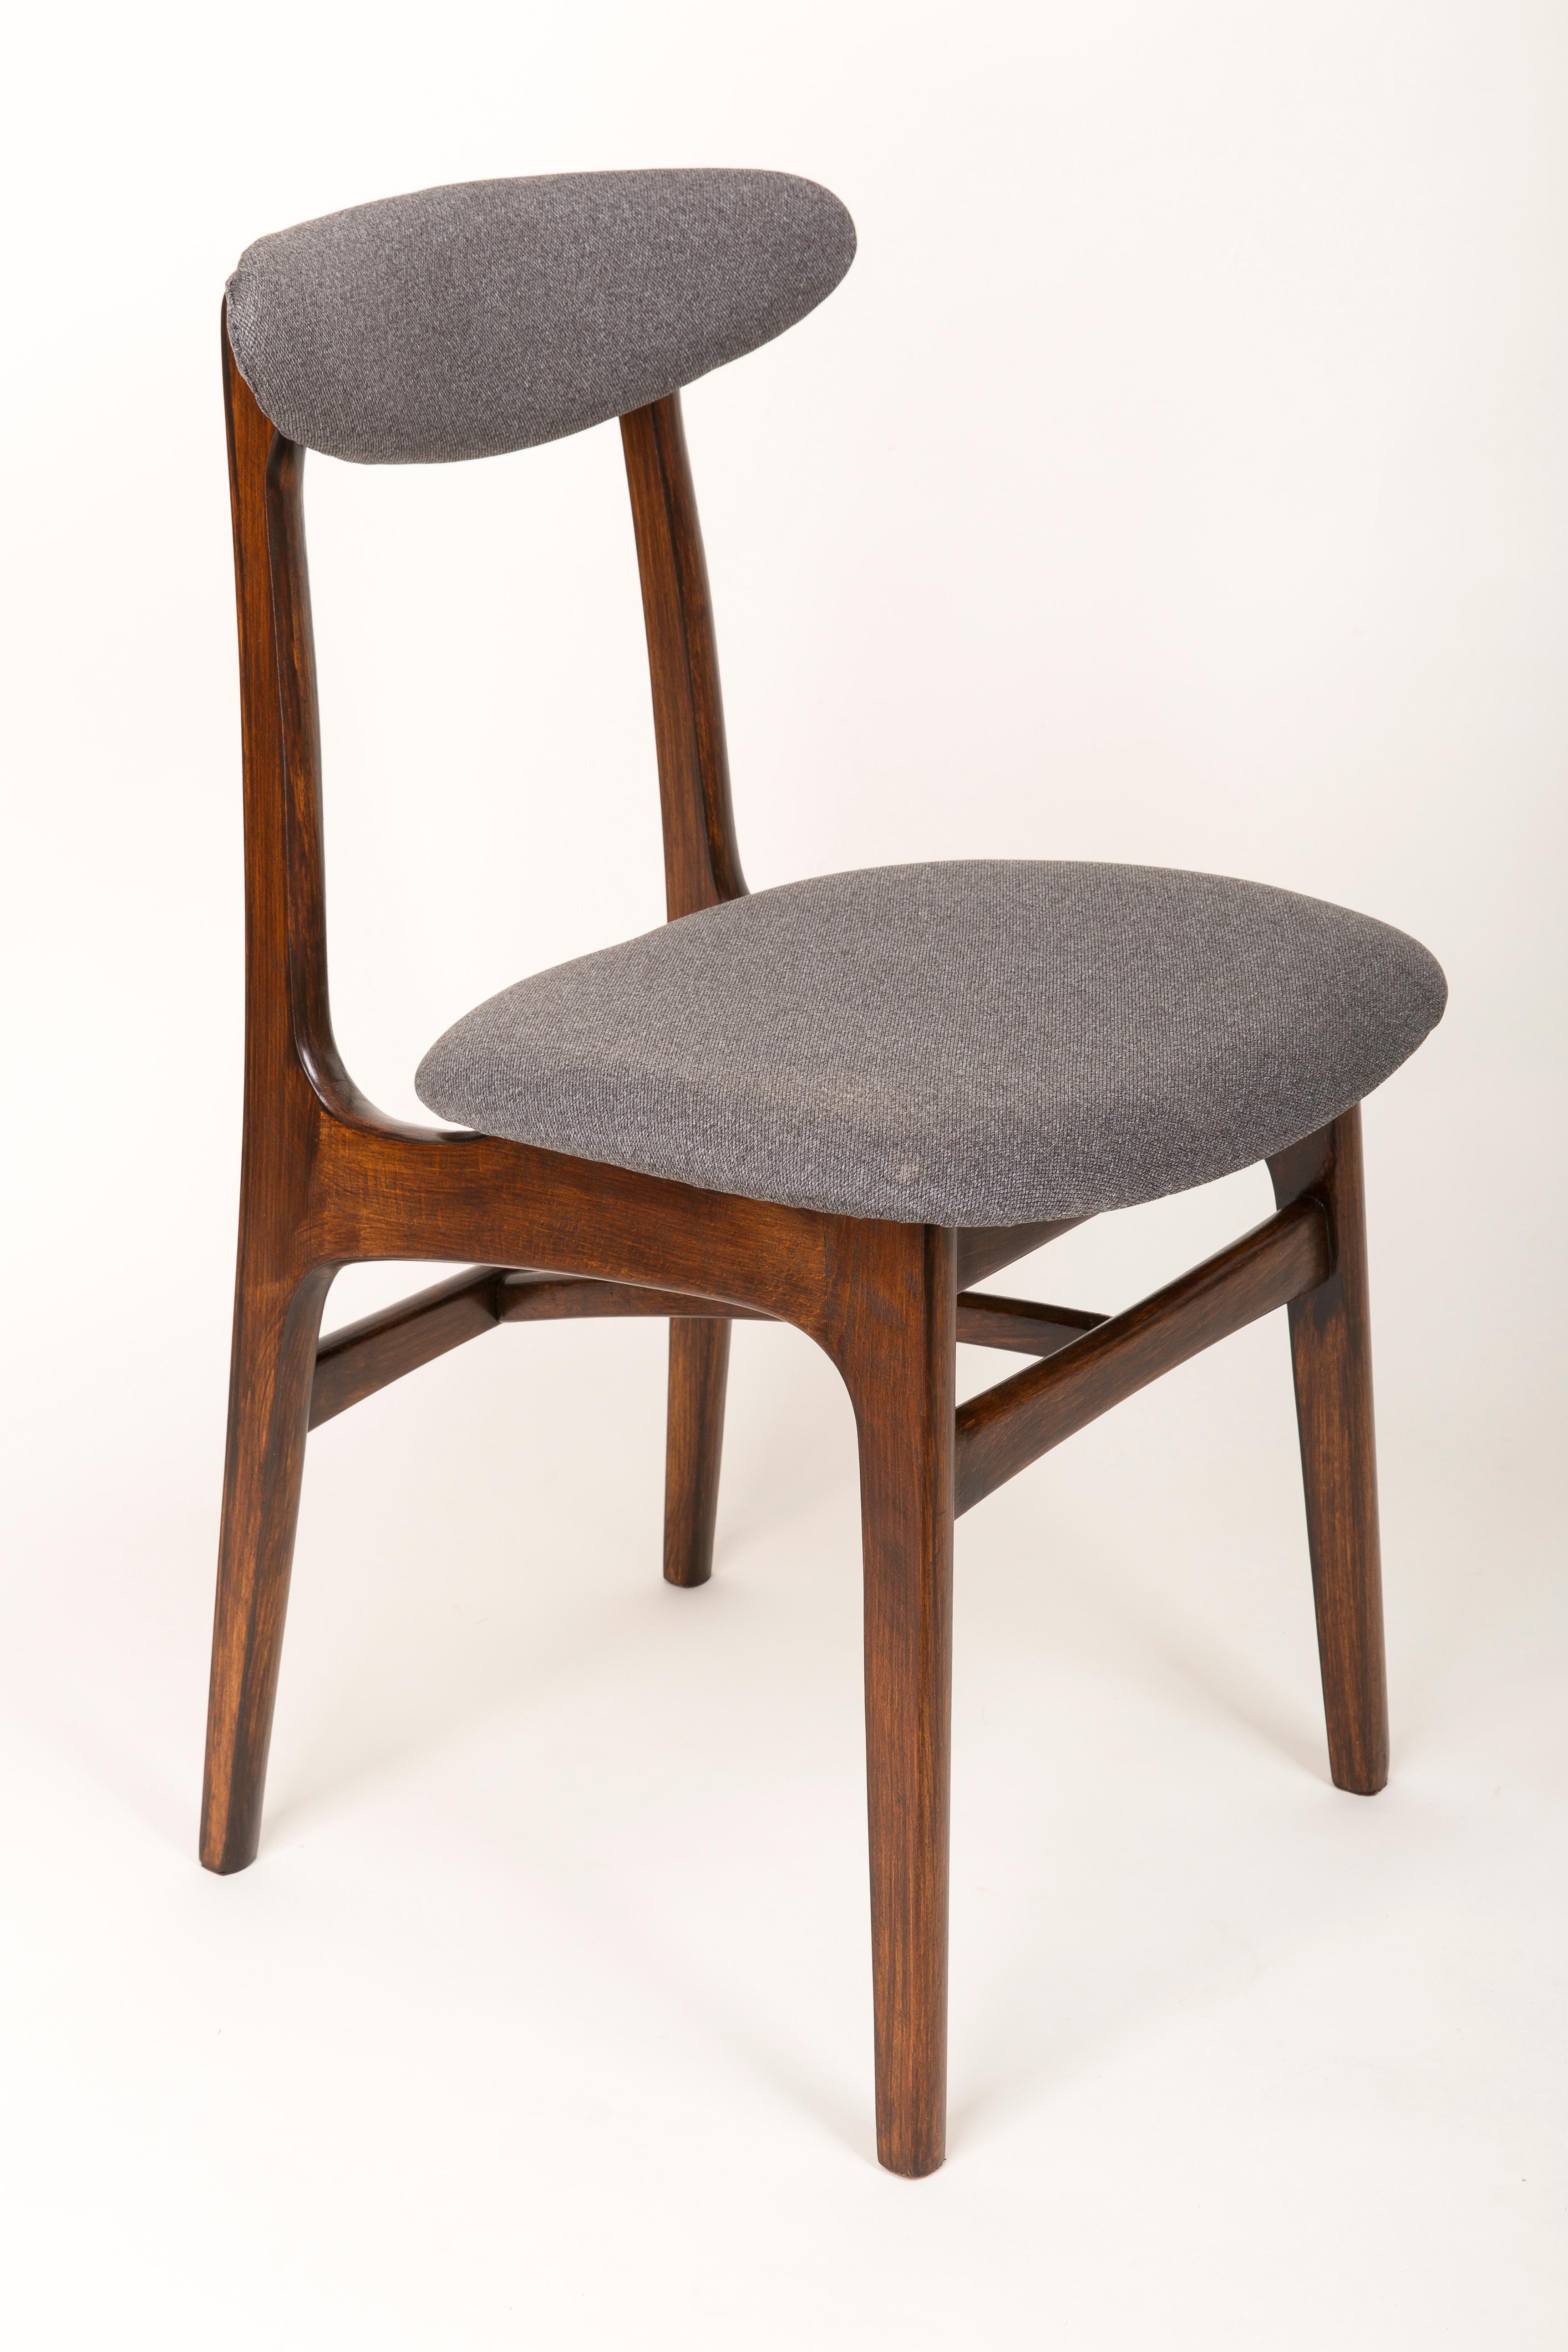 Hand-Crafted Set of Four 20th Century Gray Chairs by Rajmund Halas, 1960s For Sale